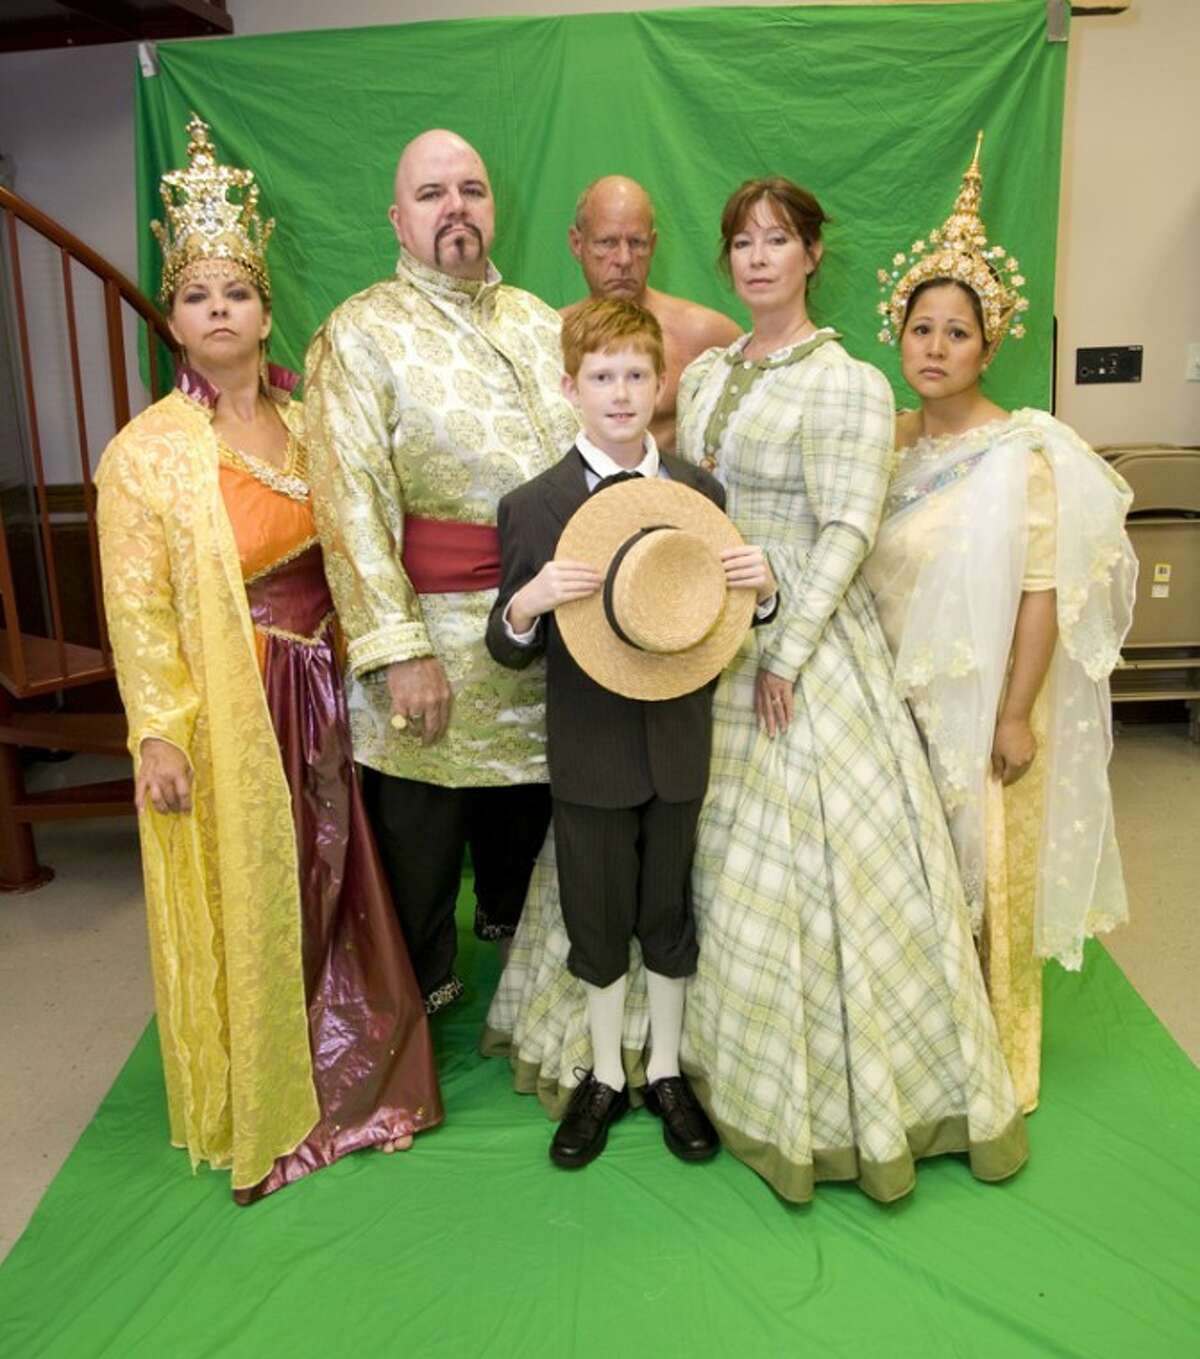 The Crighton Players open "The King and I" on Aug. 24 and it runs at the Owen Theatre through Sept. 15.